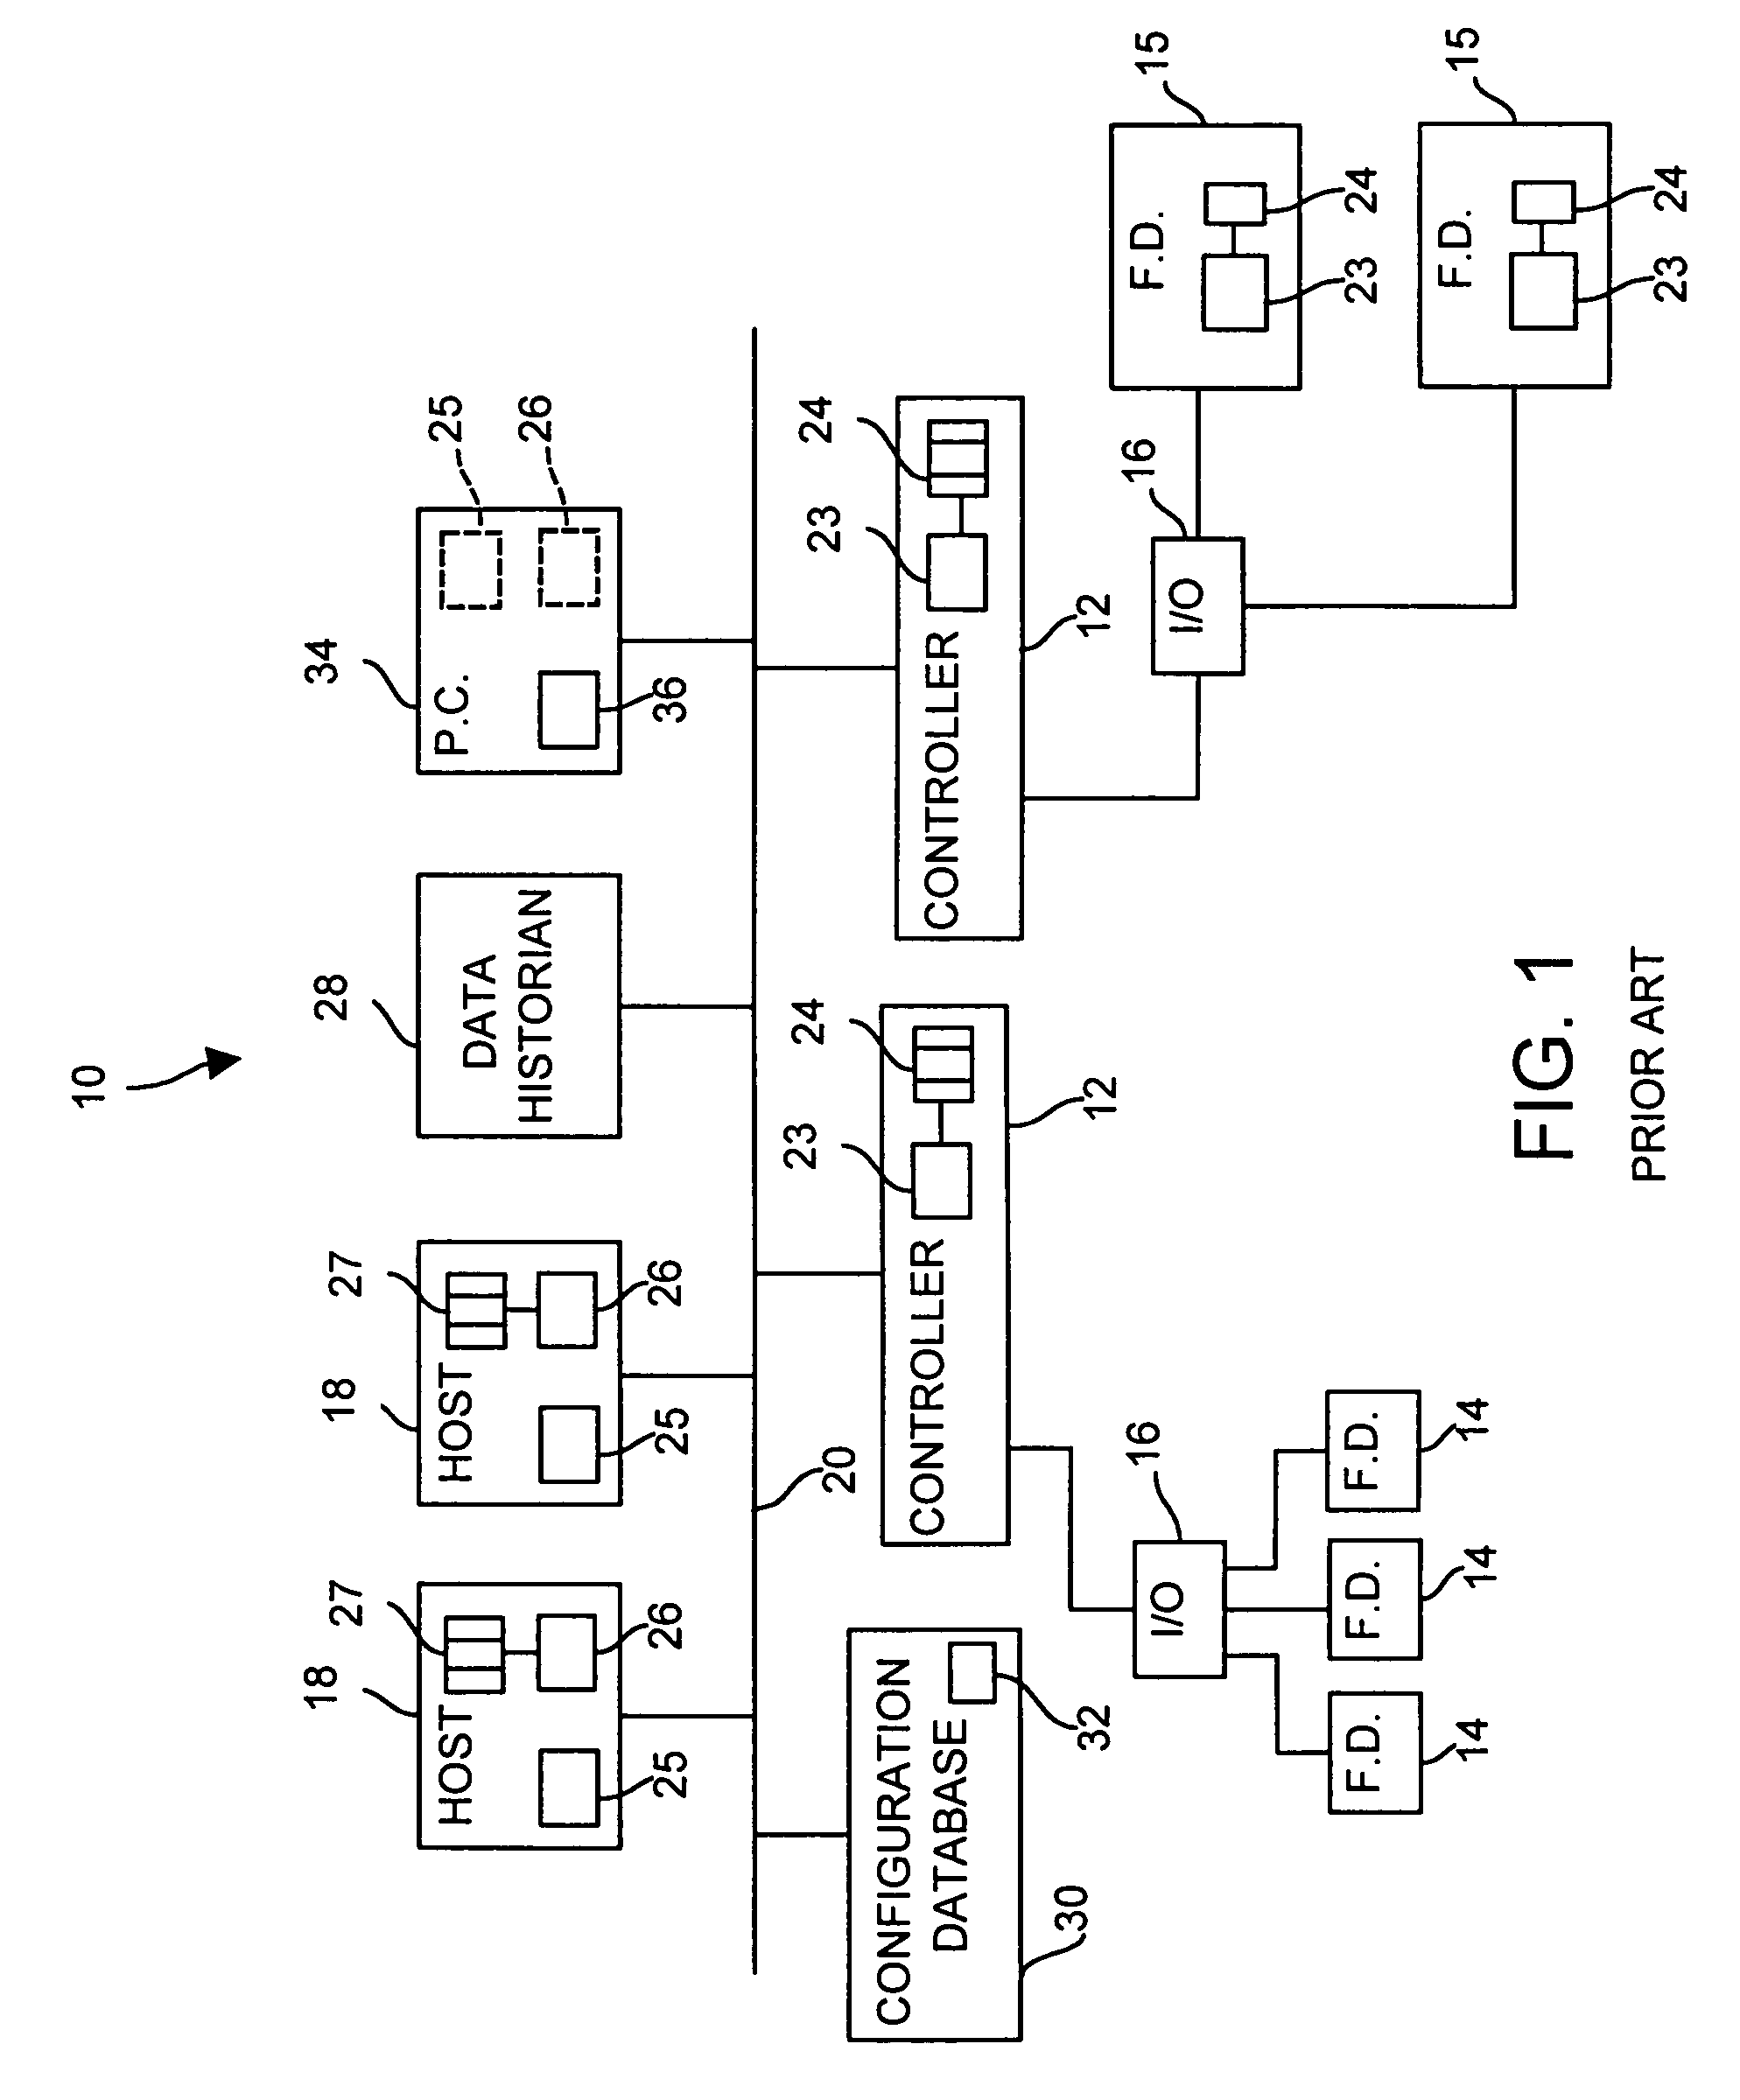 Integrated distributed process control system functionality on a single computer